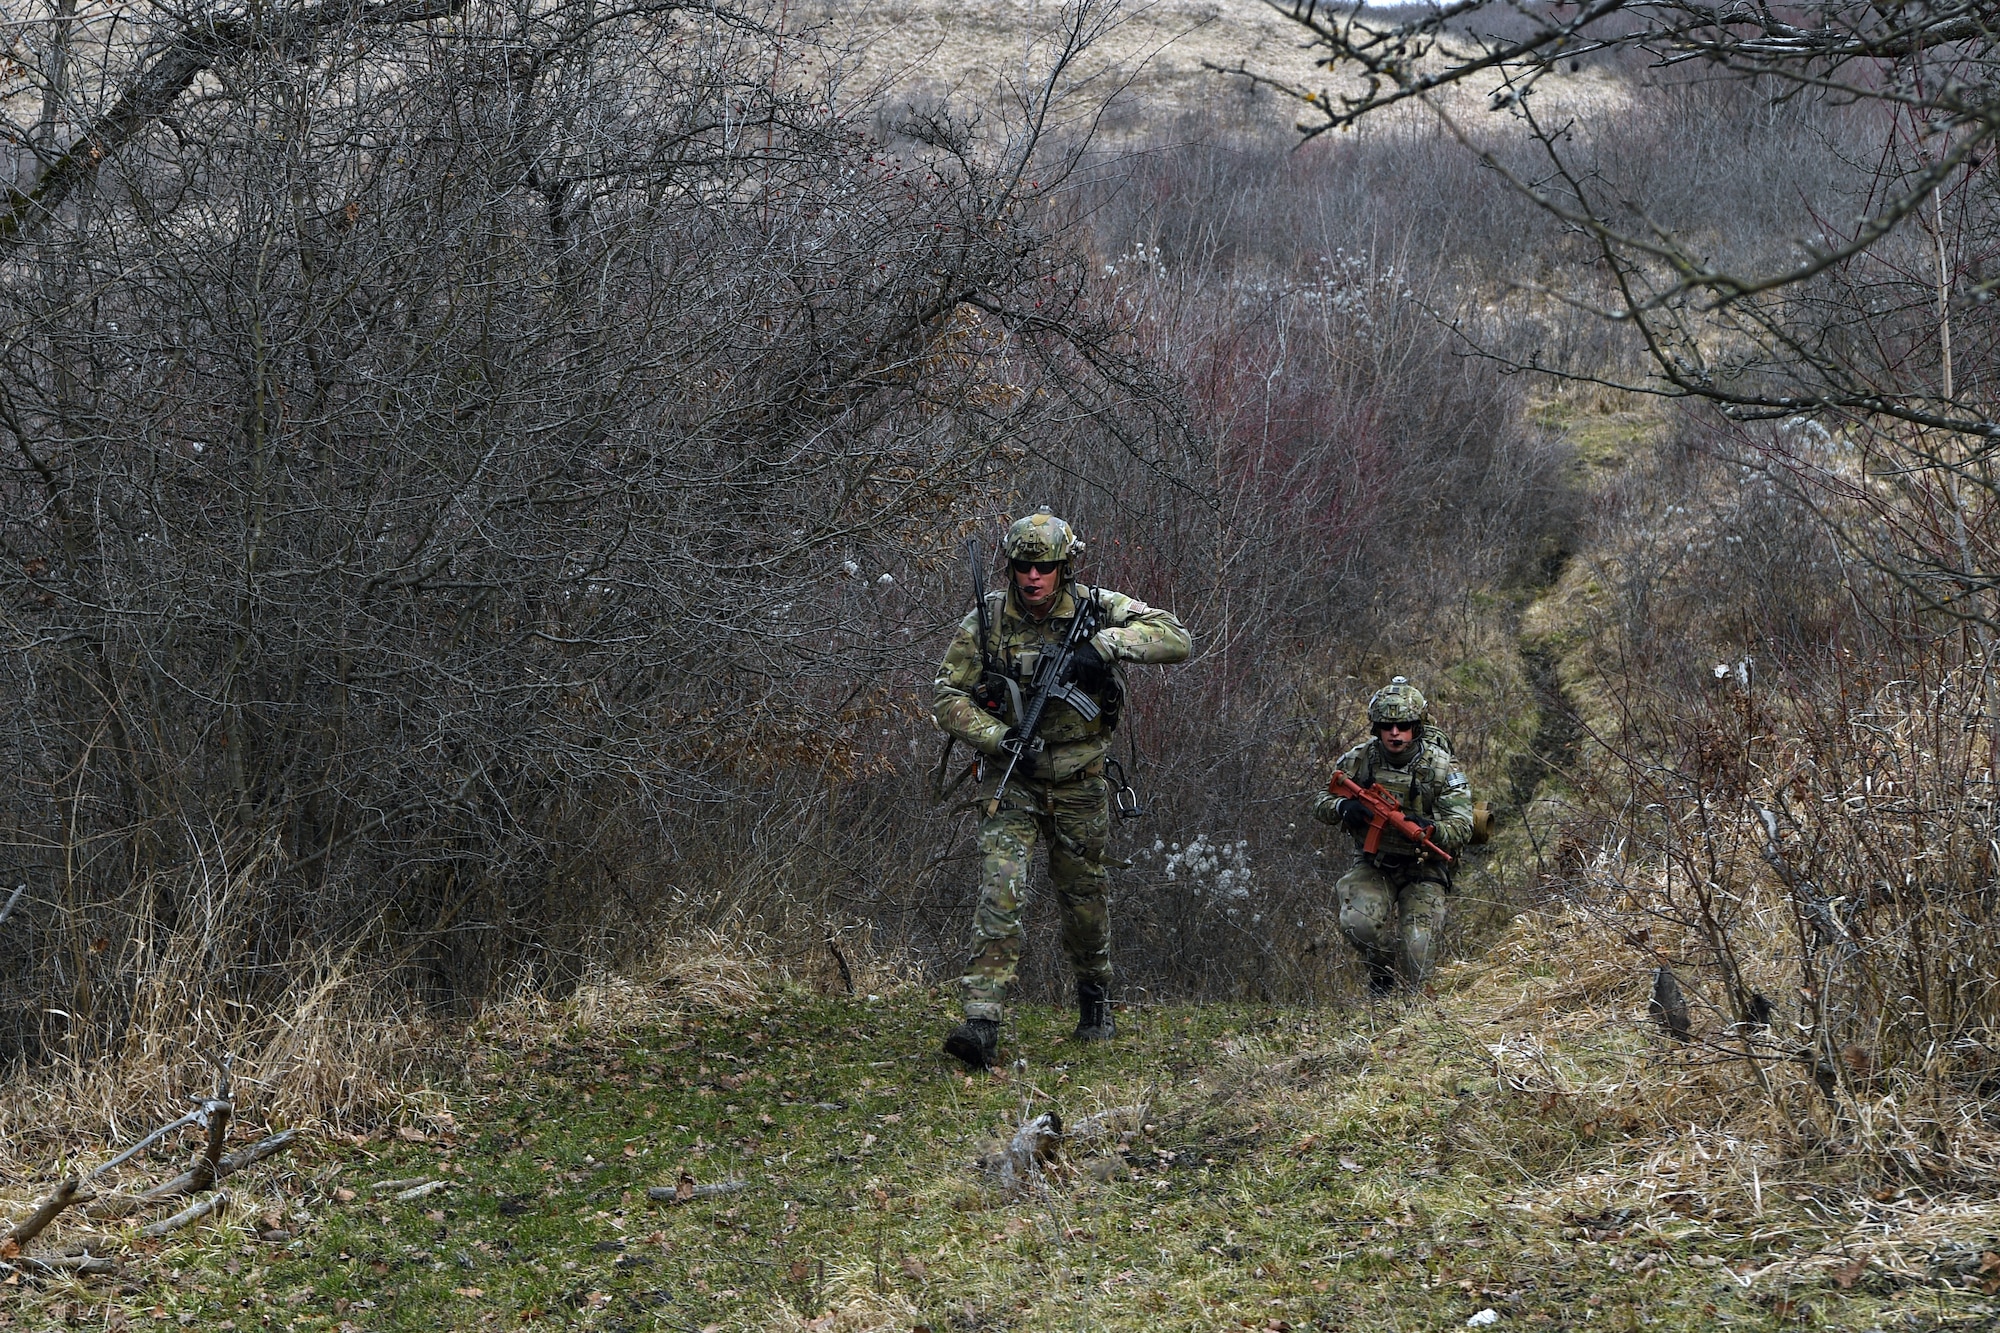 Two pararescuemen with the 57th Rescue Squadron search for a downed pilot during Operation Porcupine in Romania, March 4, 2021.